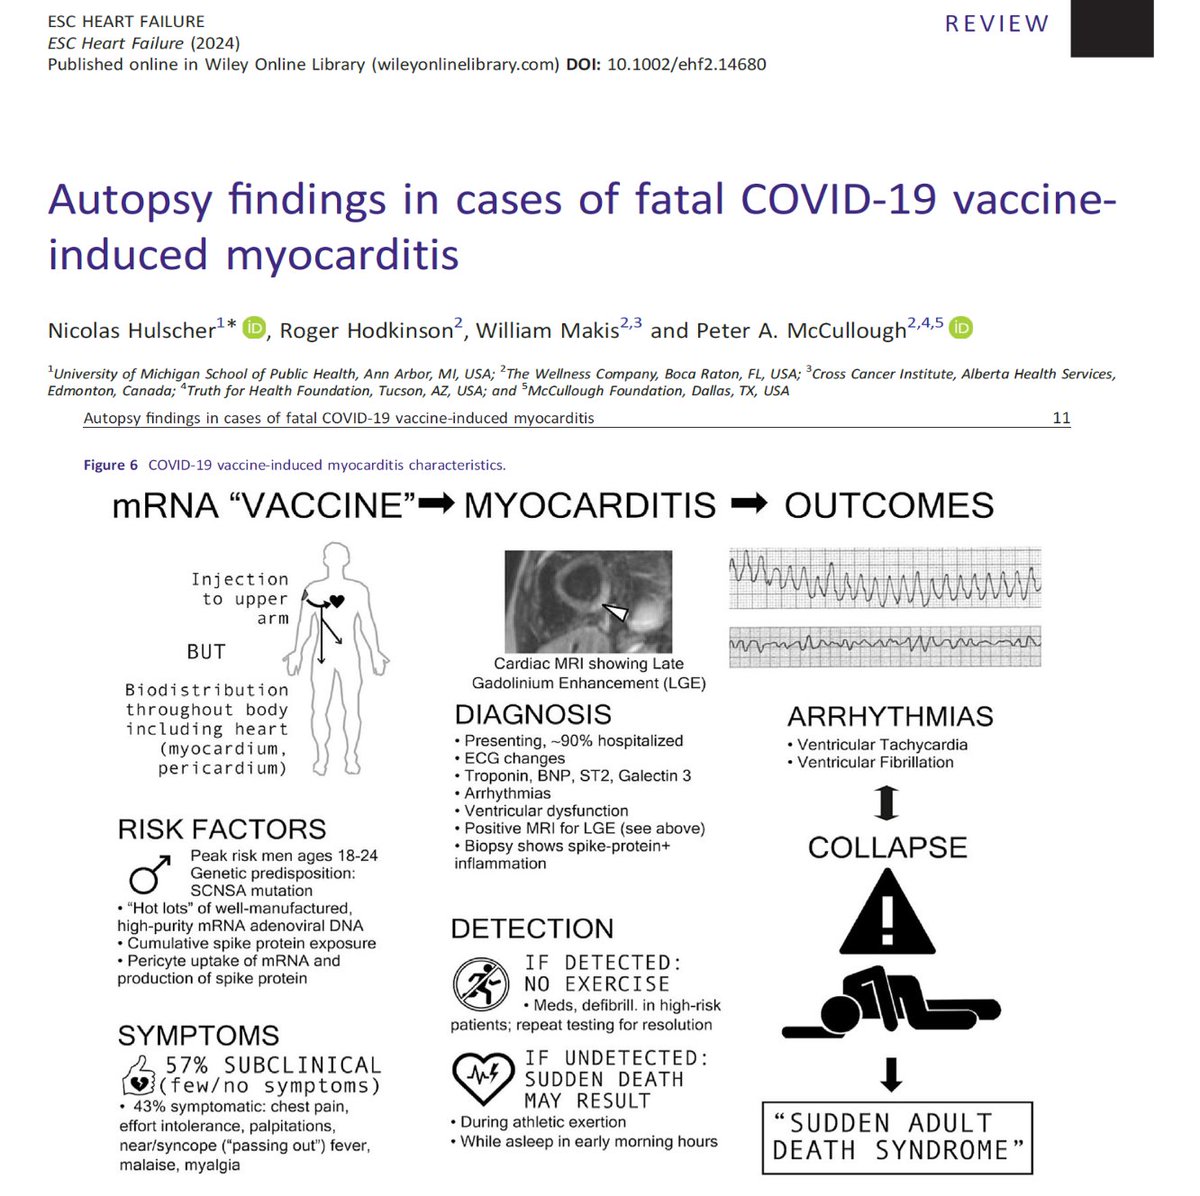 The mechanism of sudden unexplained death in vaccinated patients has been published Hulscher N, Hodkinson R, Makis W, McCullough PA. Autopsy findings in cases...ESC Heart Fail. 2024 Jan 14. doi: 10.1002/ehf2.14680. Epub ahead of print. PMID: 38221509.